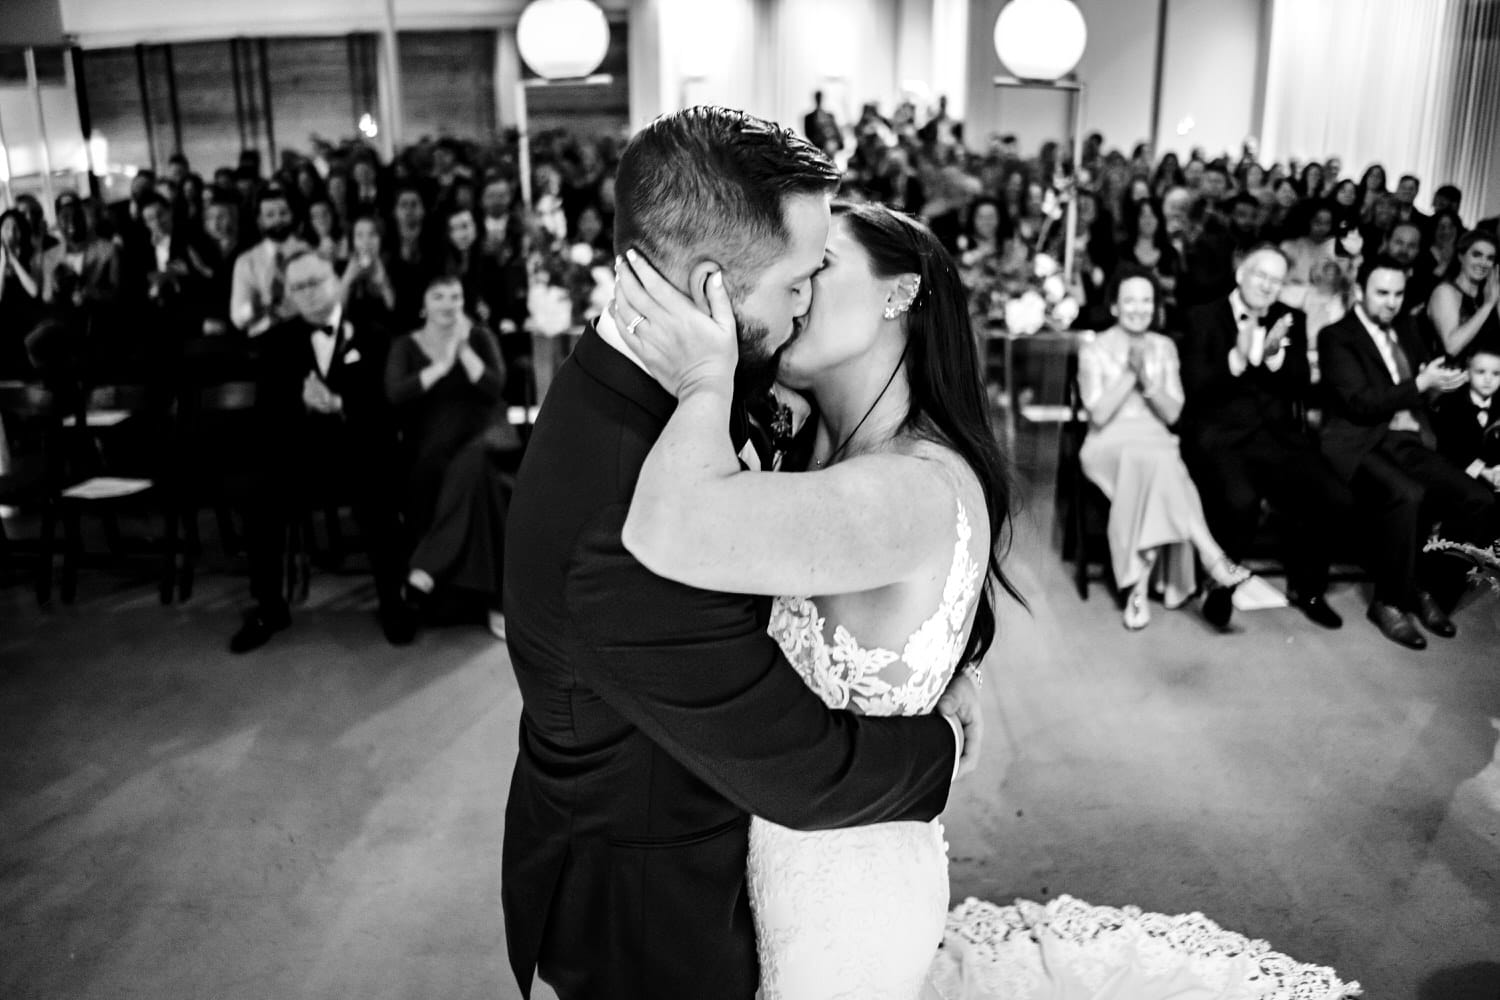 A candid black and white picture taken from behind the bride and groom, looking back at the audience as the bride and groom share their first kiss at the end of their wedding ceremony at Pennway Place in Kansas City. 